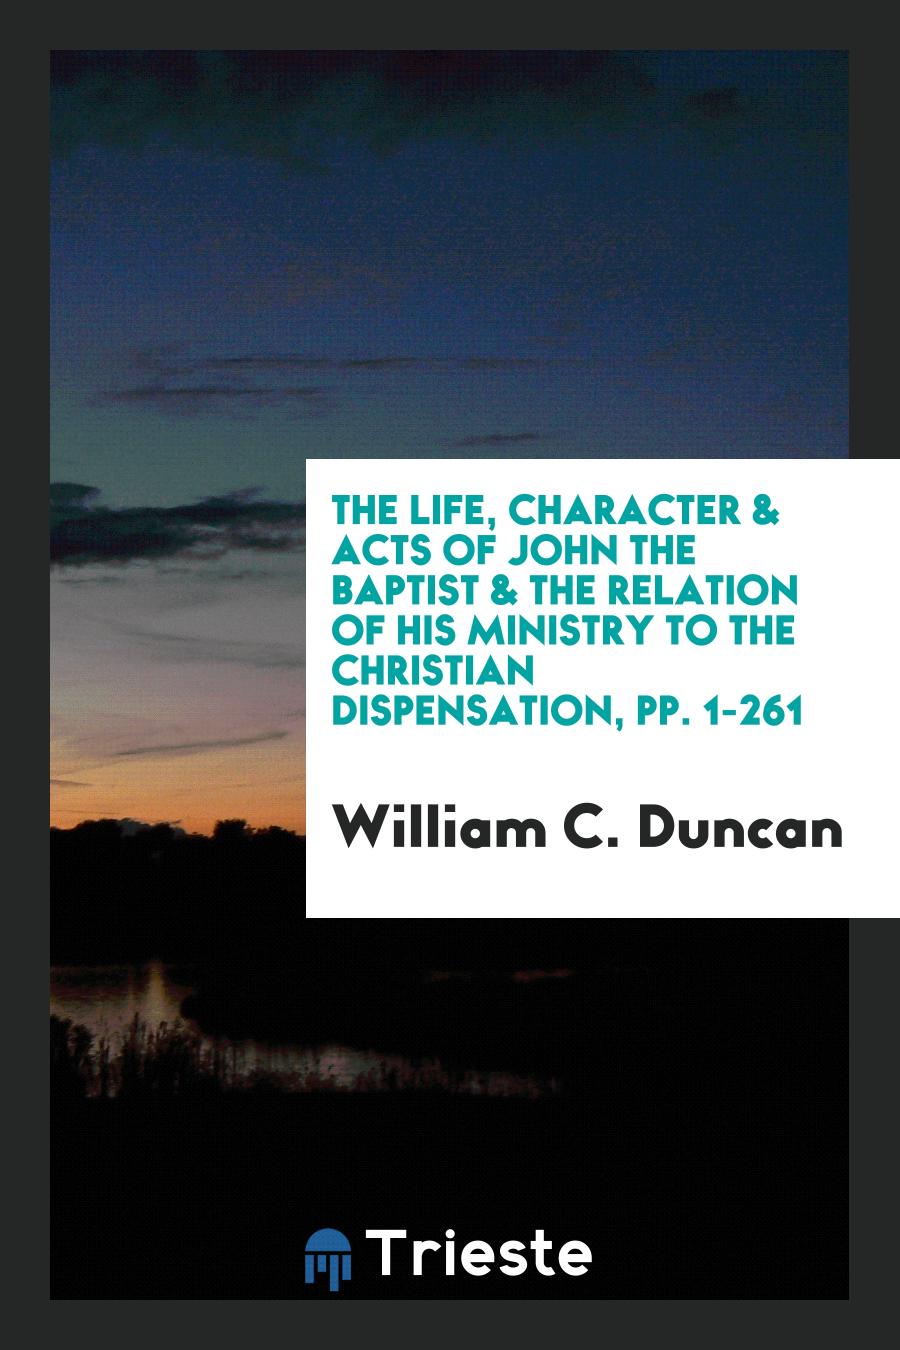 The Life, Character & Acts of John the Baptist & the Relation of His Ministry to the Christian Dispensation, pp. 1-261